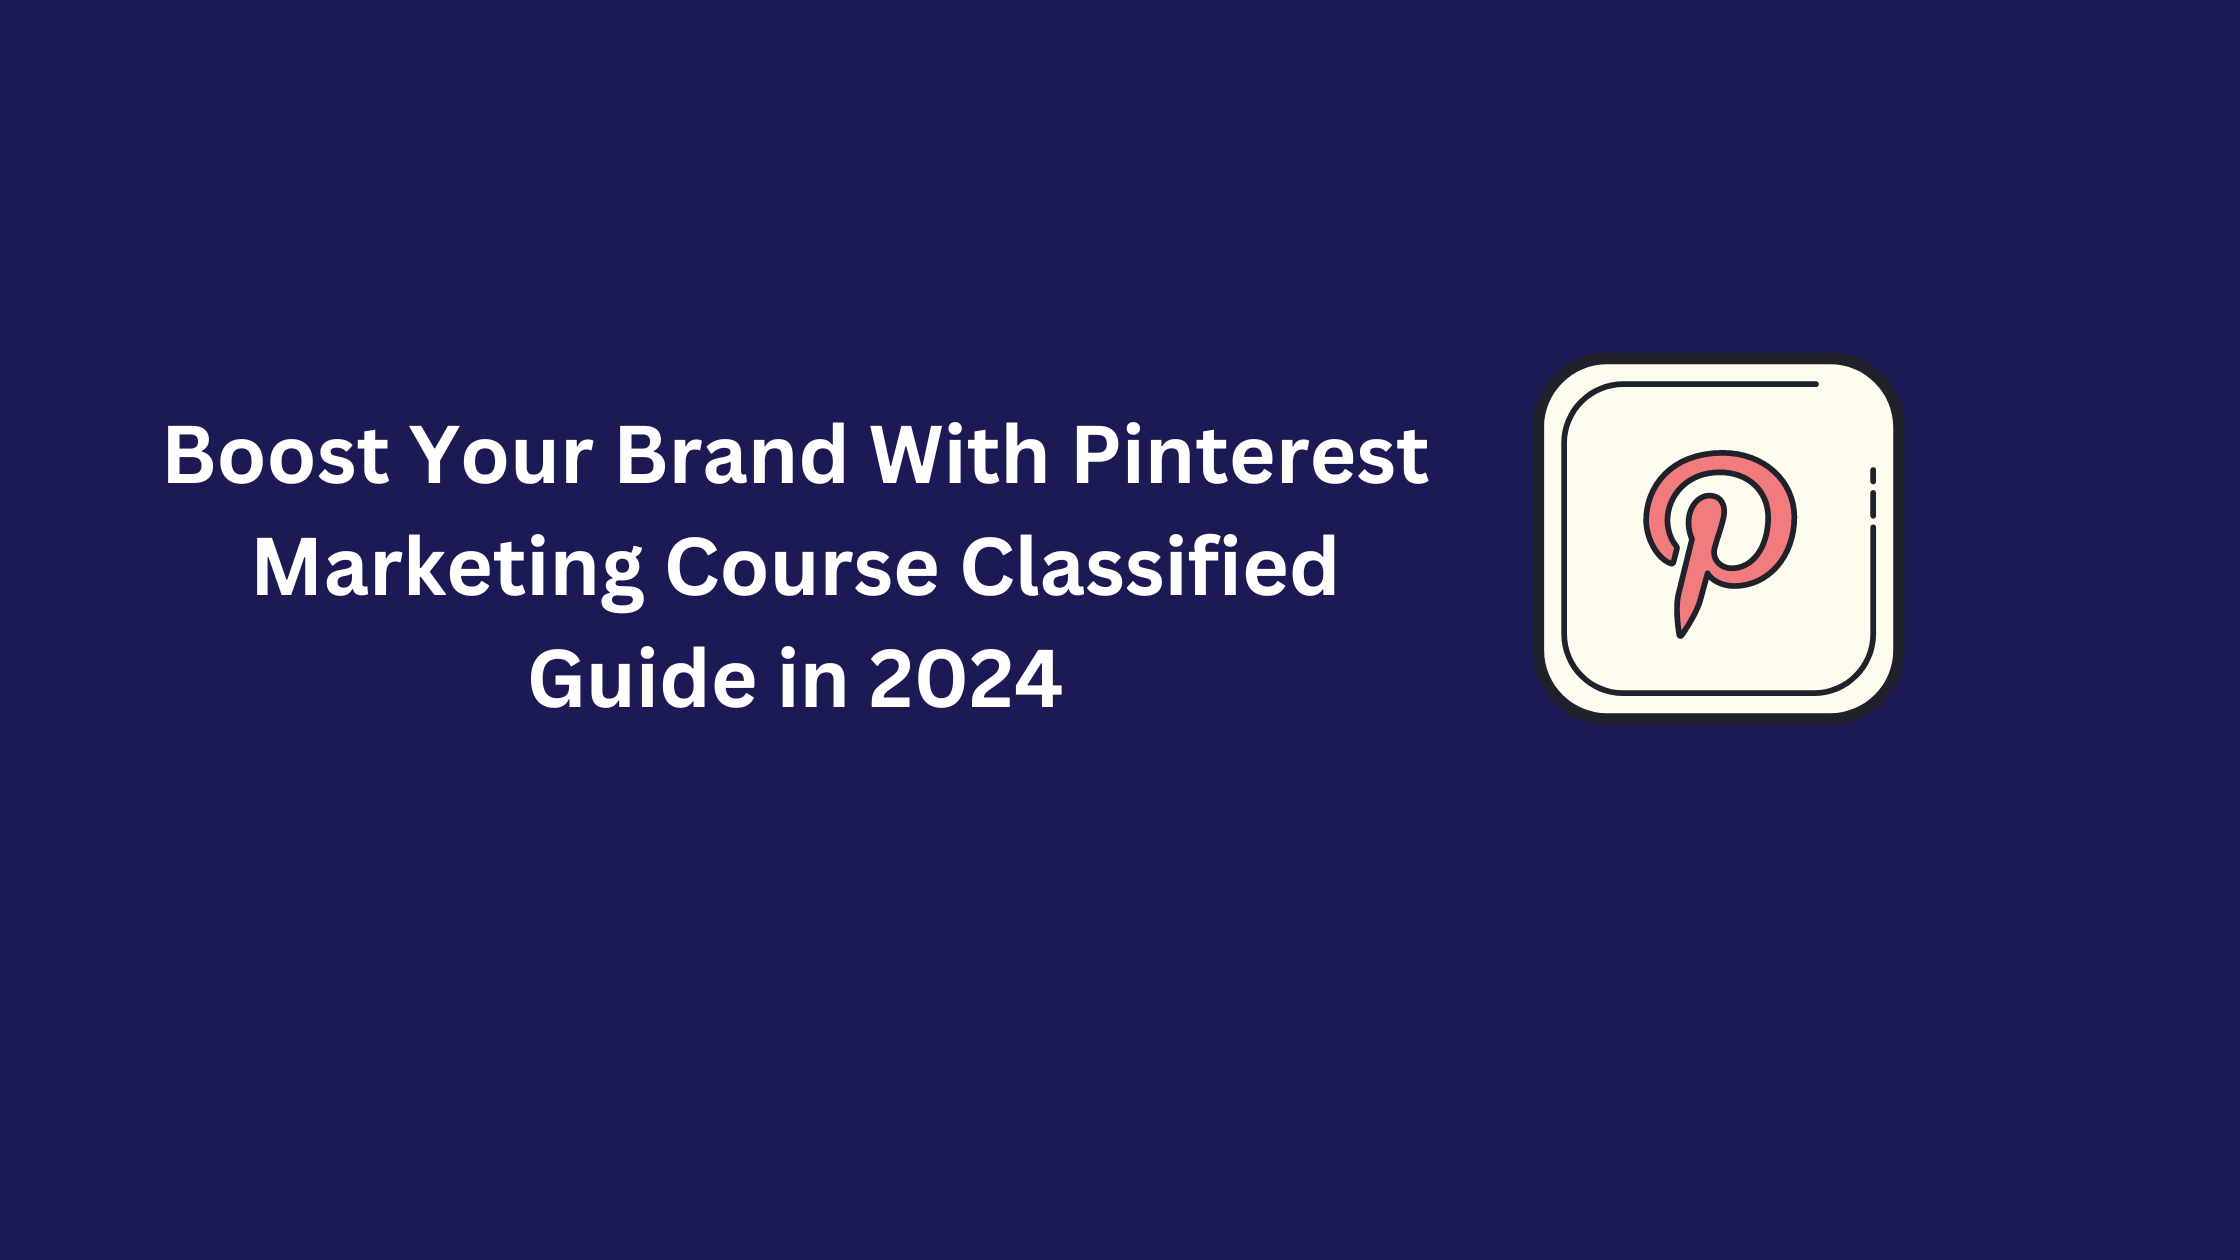 Boost Your Brand With Pinterest Marketing Course Classified Guide in 2024